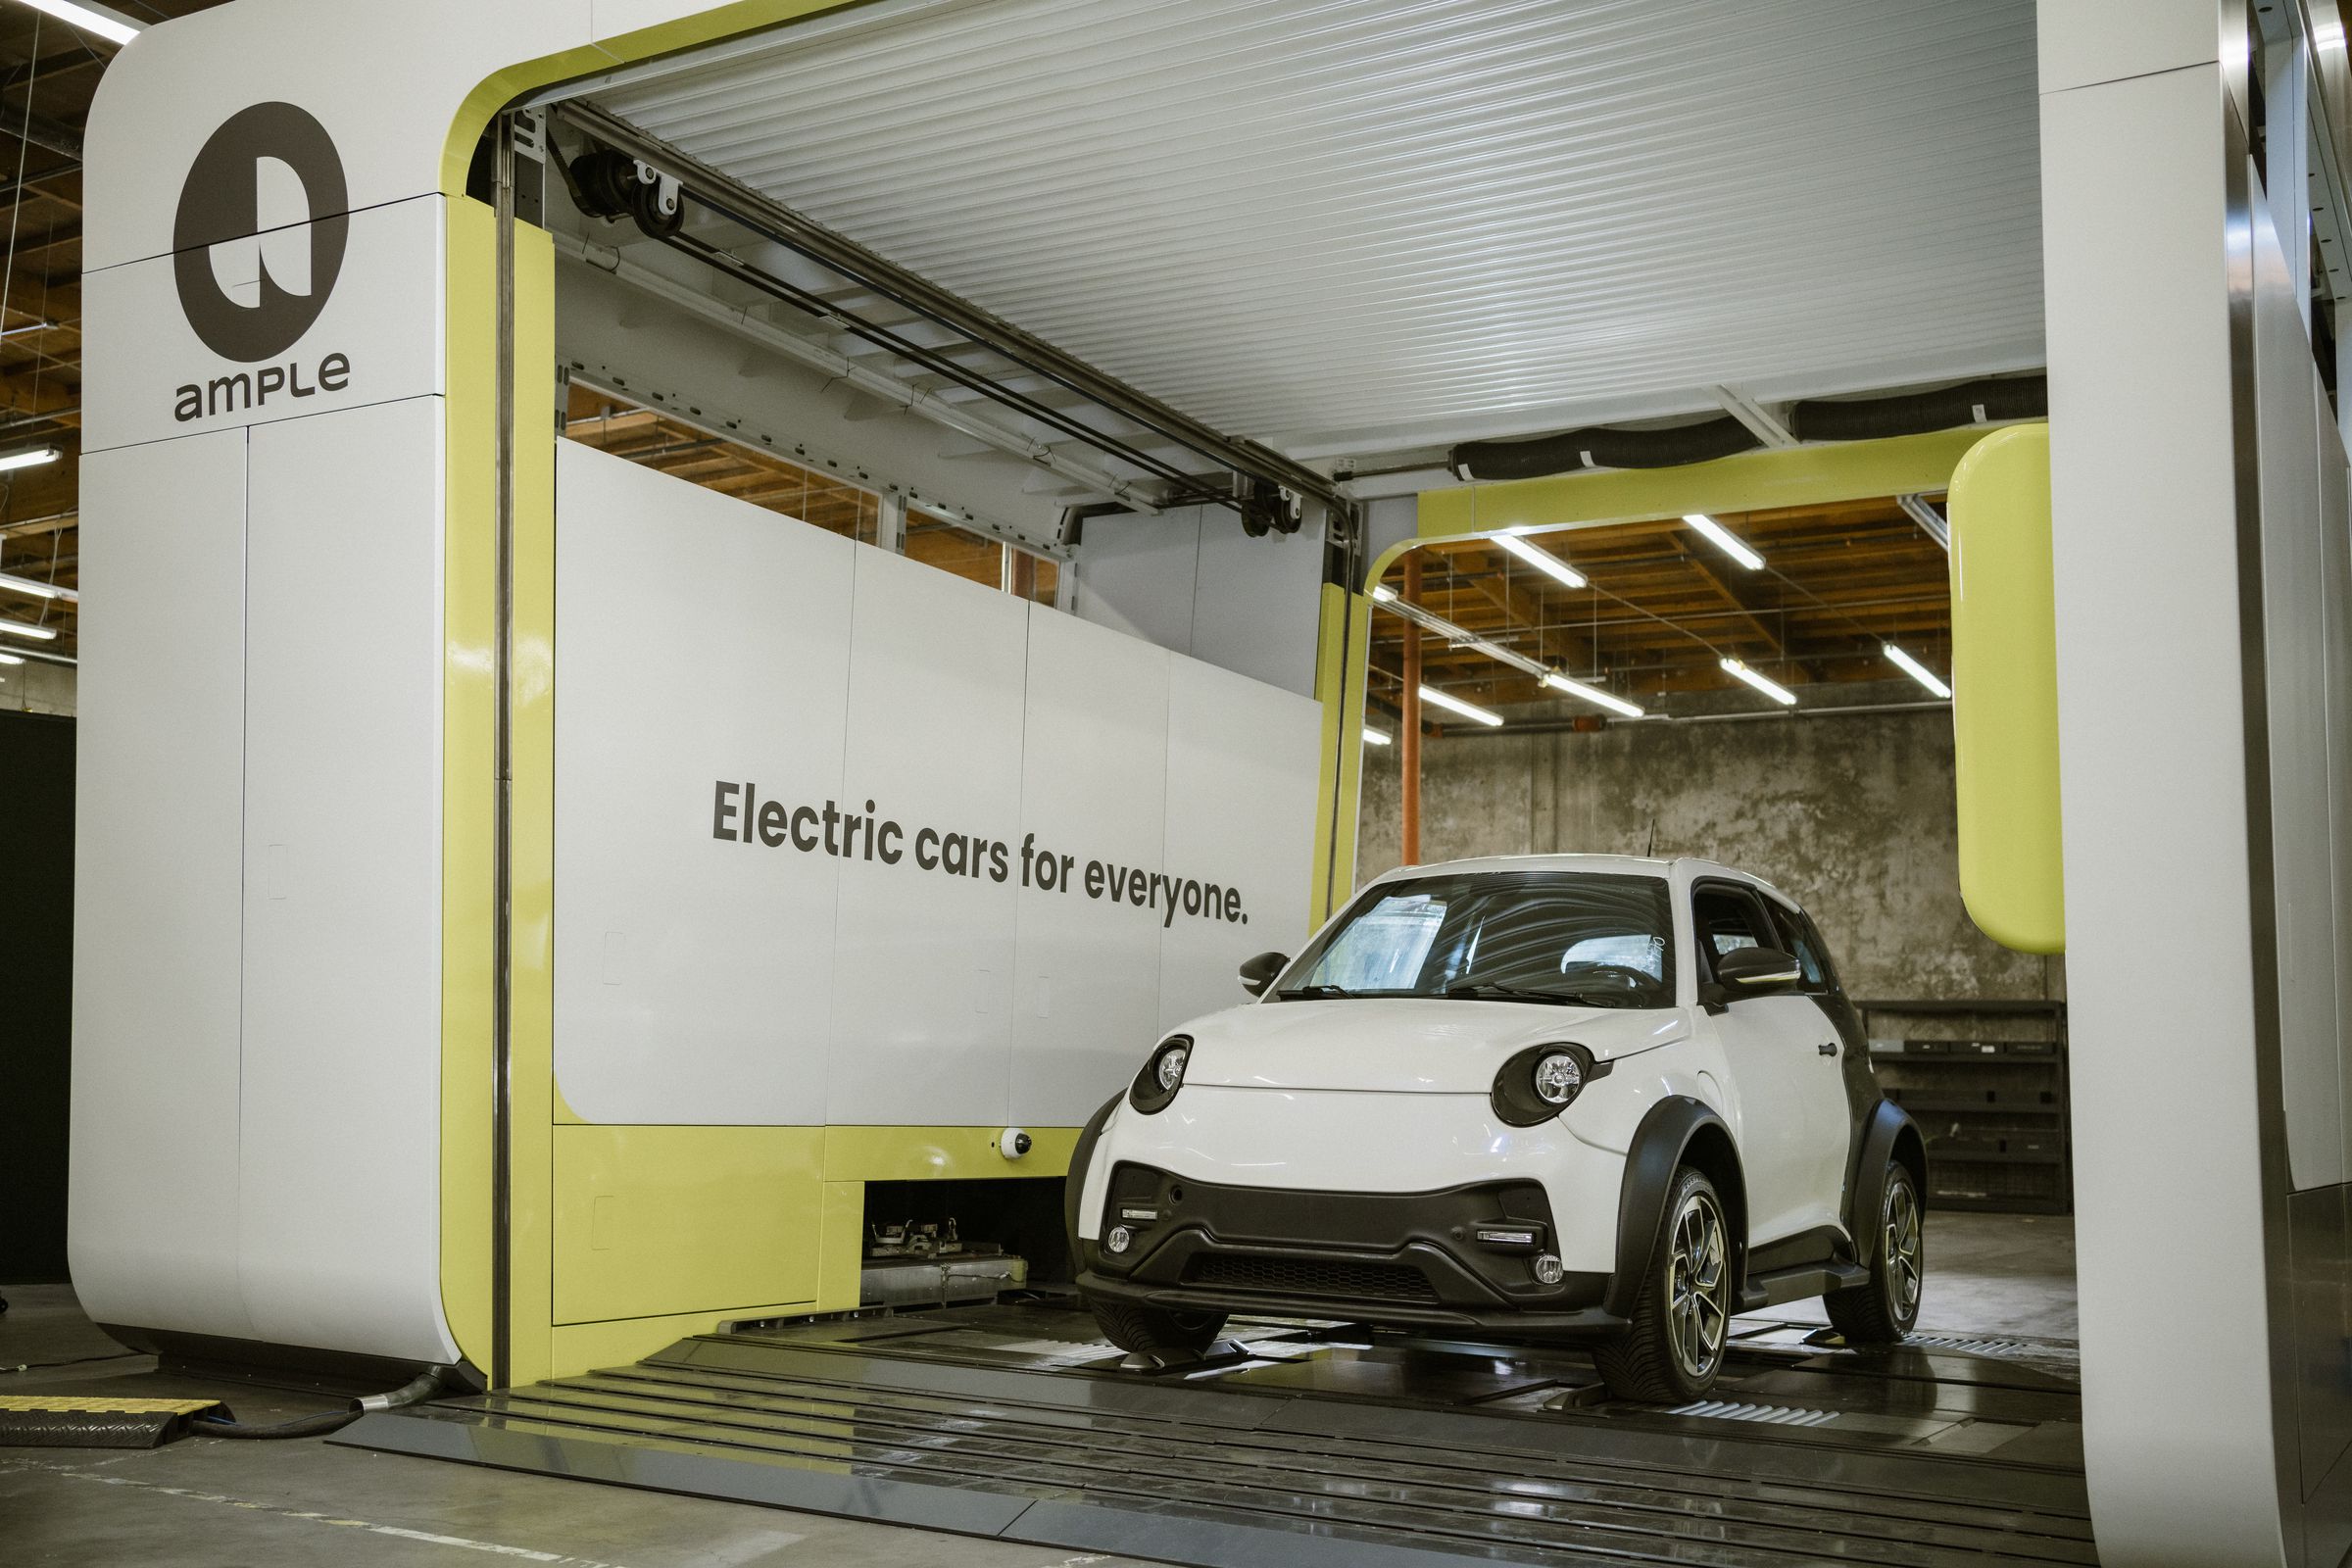 The Future Of EV Charging: Battery Swapping And Beyond